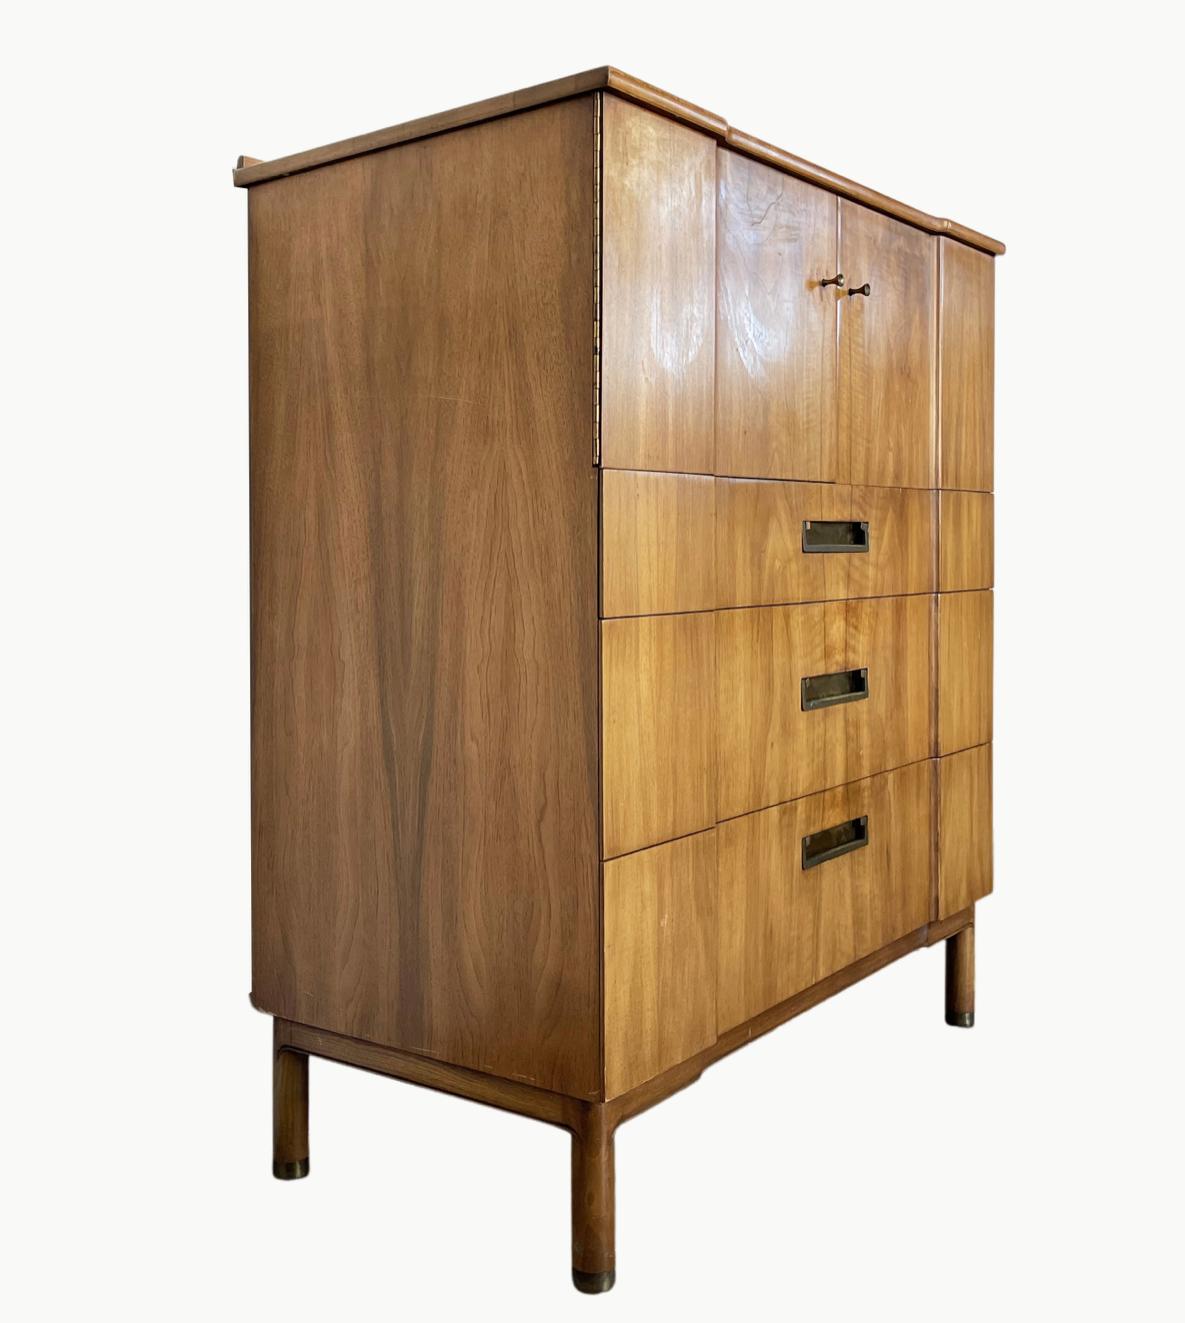 Stunningly elegant gentleman's chest made by John Widdicomb. John Widdicomb was a manufacturing company with a long tradition of crafting some of the biggest names in furniture like T.H. Robsjohn-Gibbings. The company was purchased in 2002 by